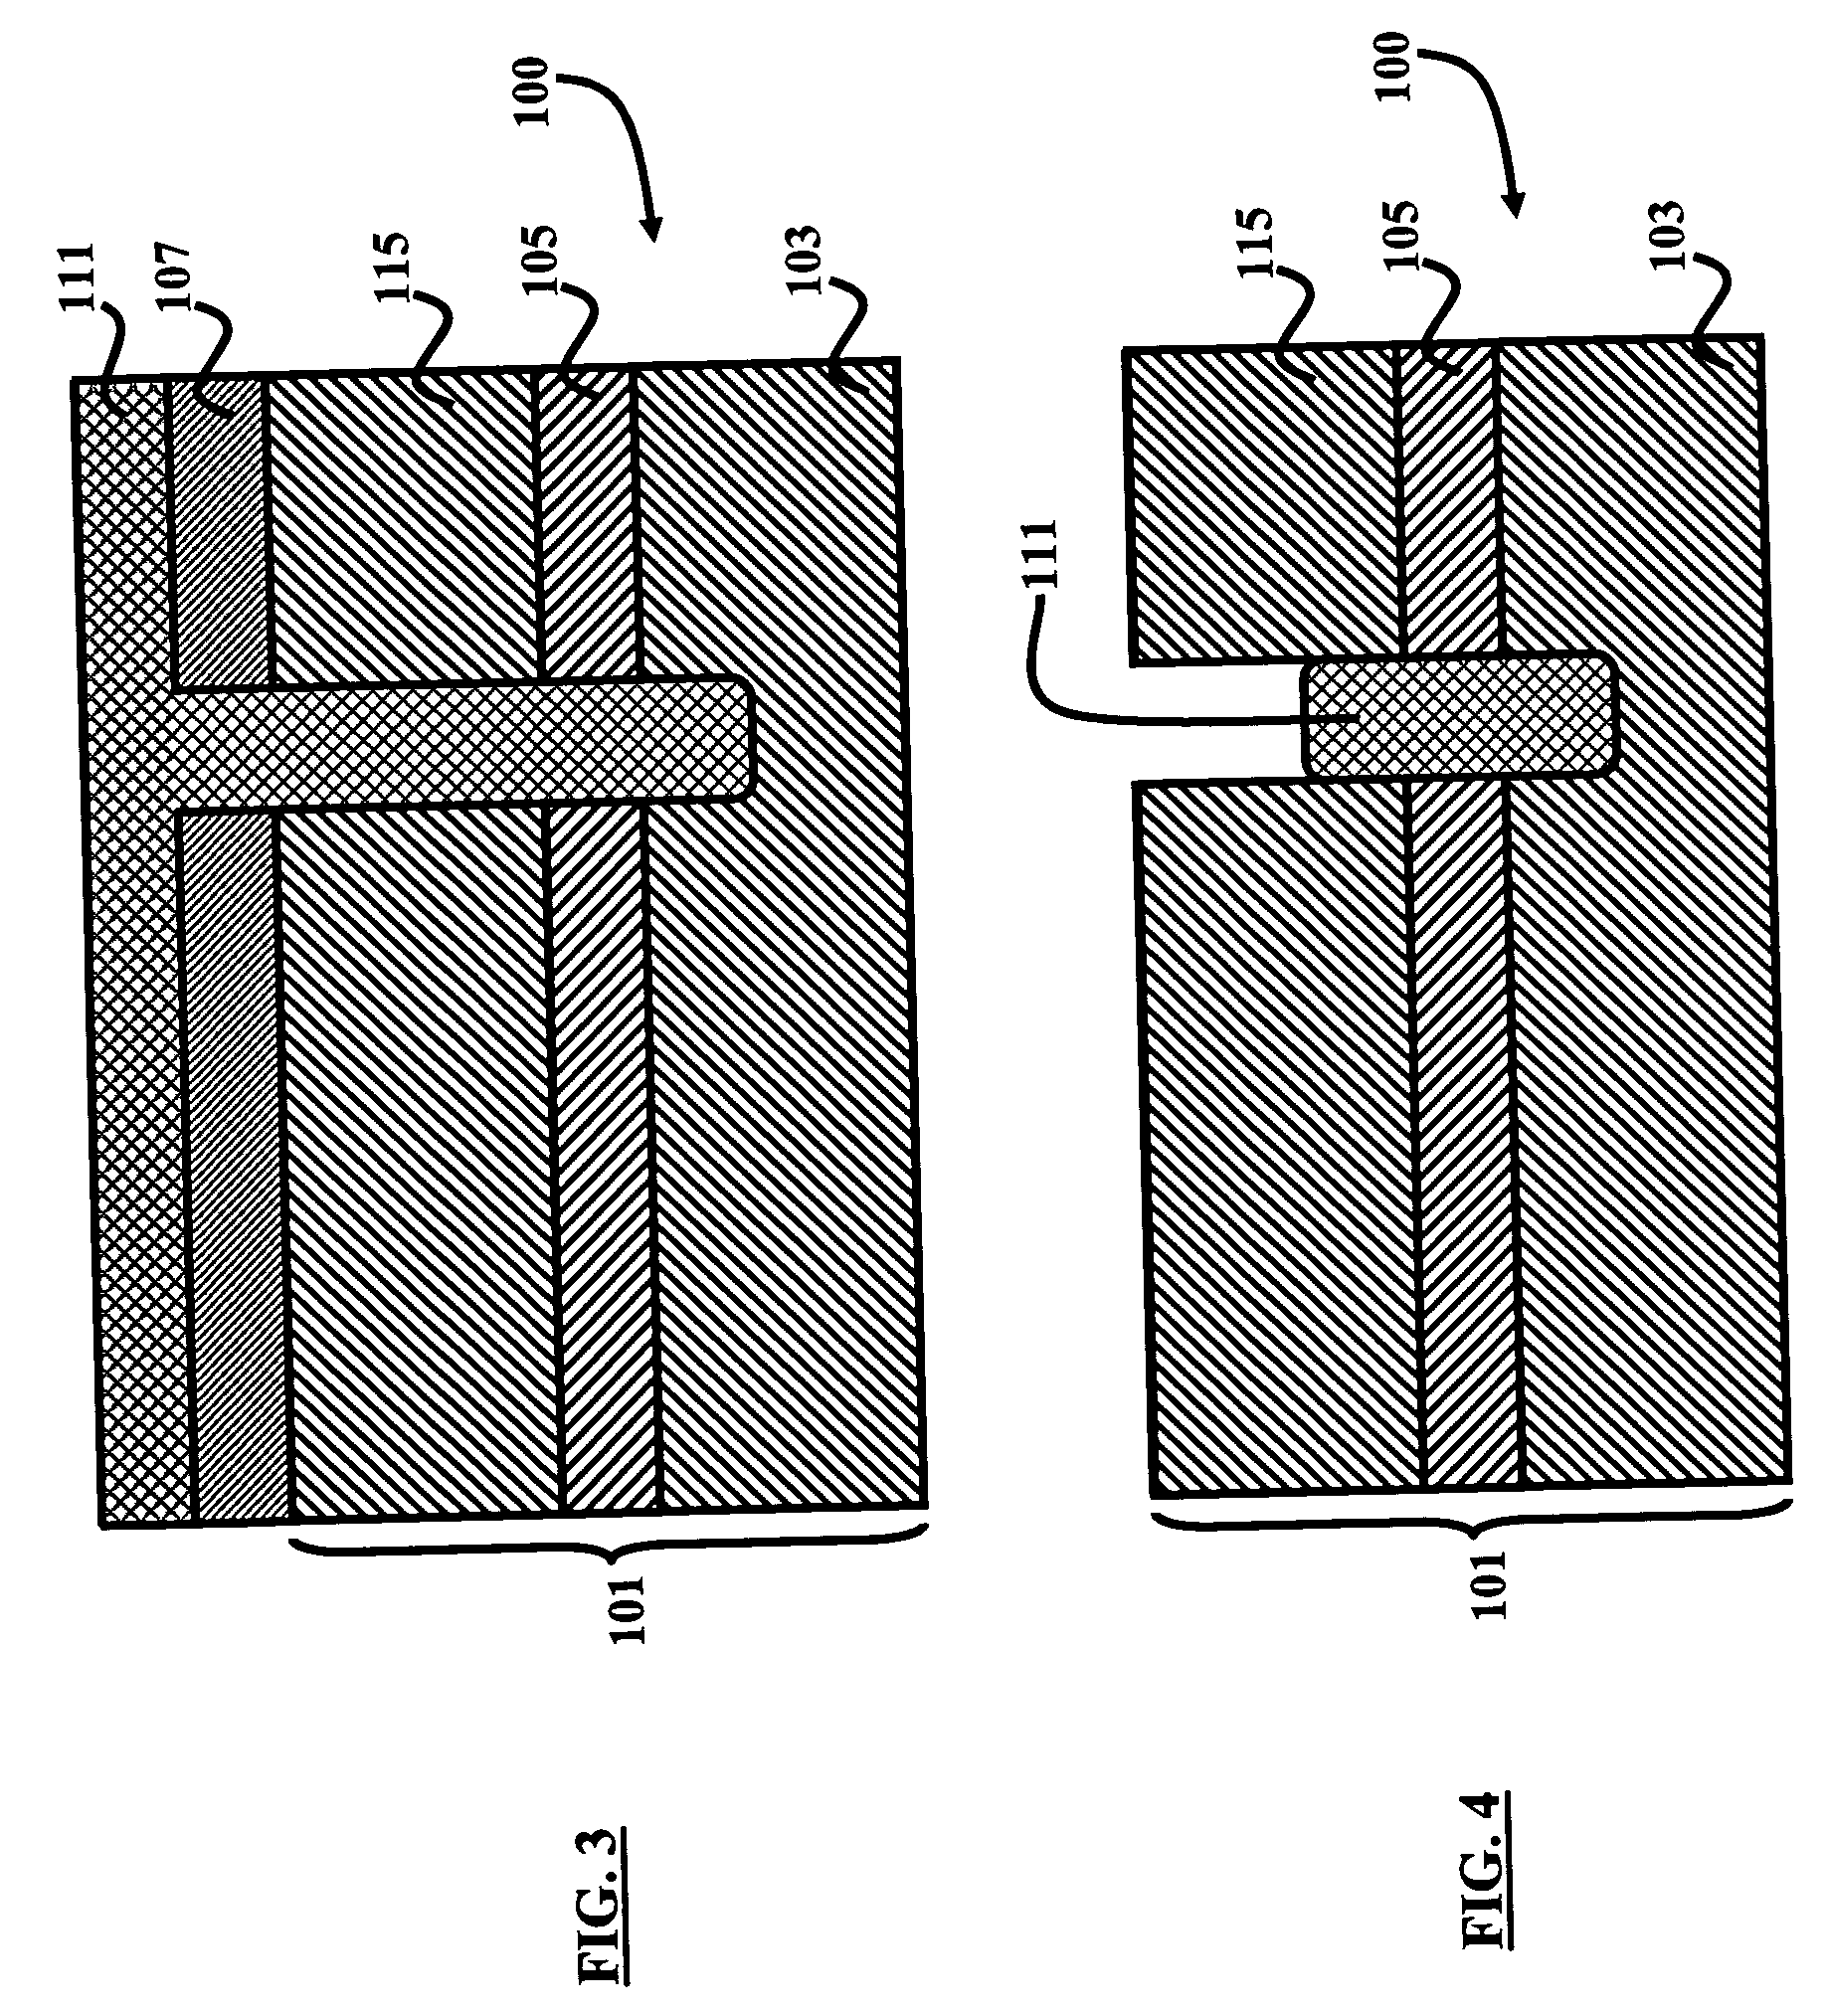 Planar substrate devices integrated with finfets and method of manufacture